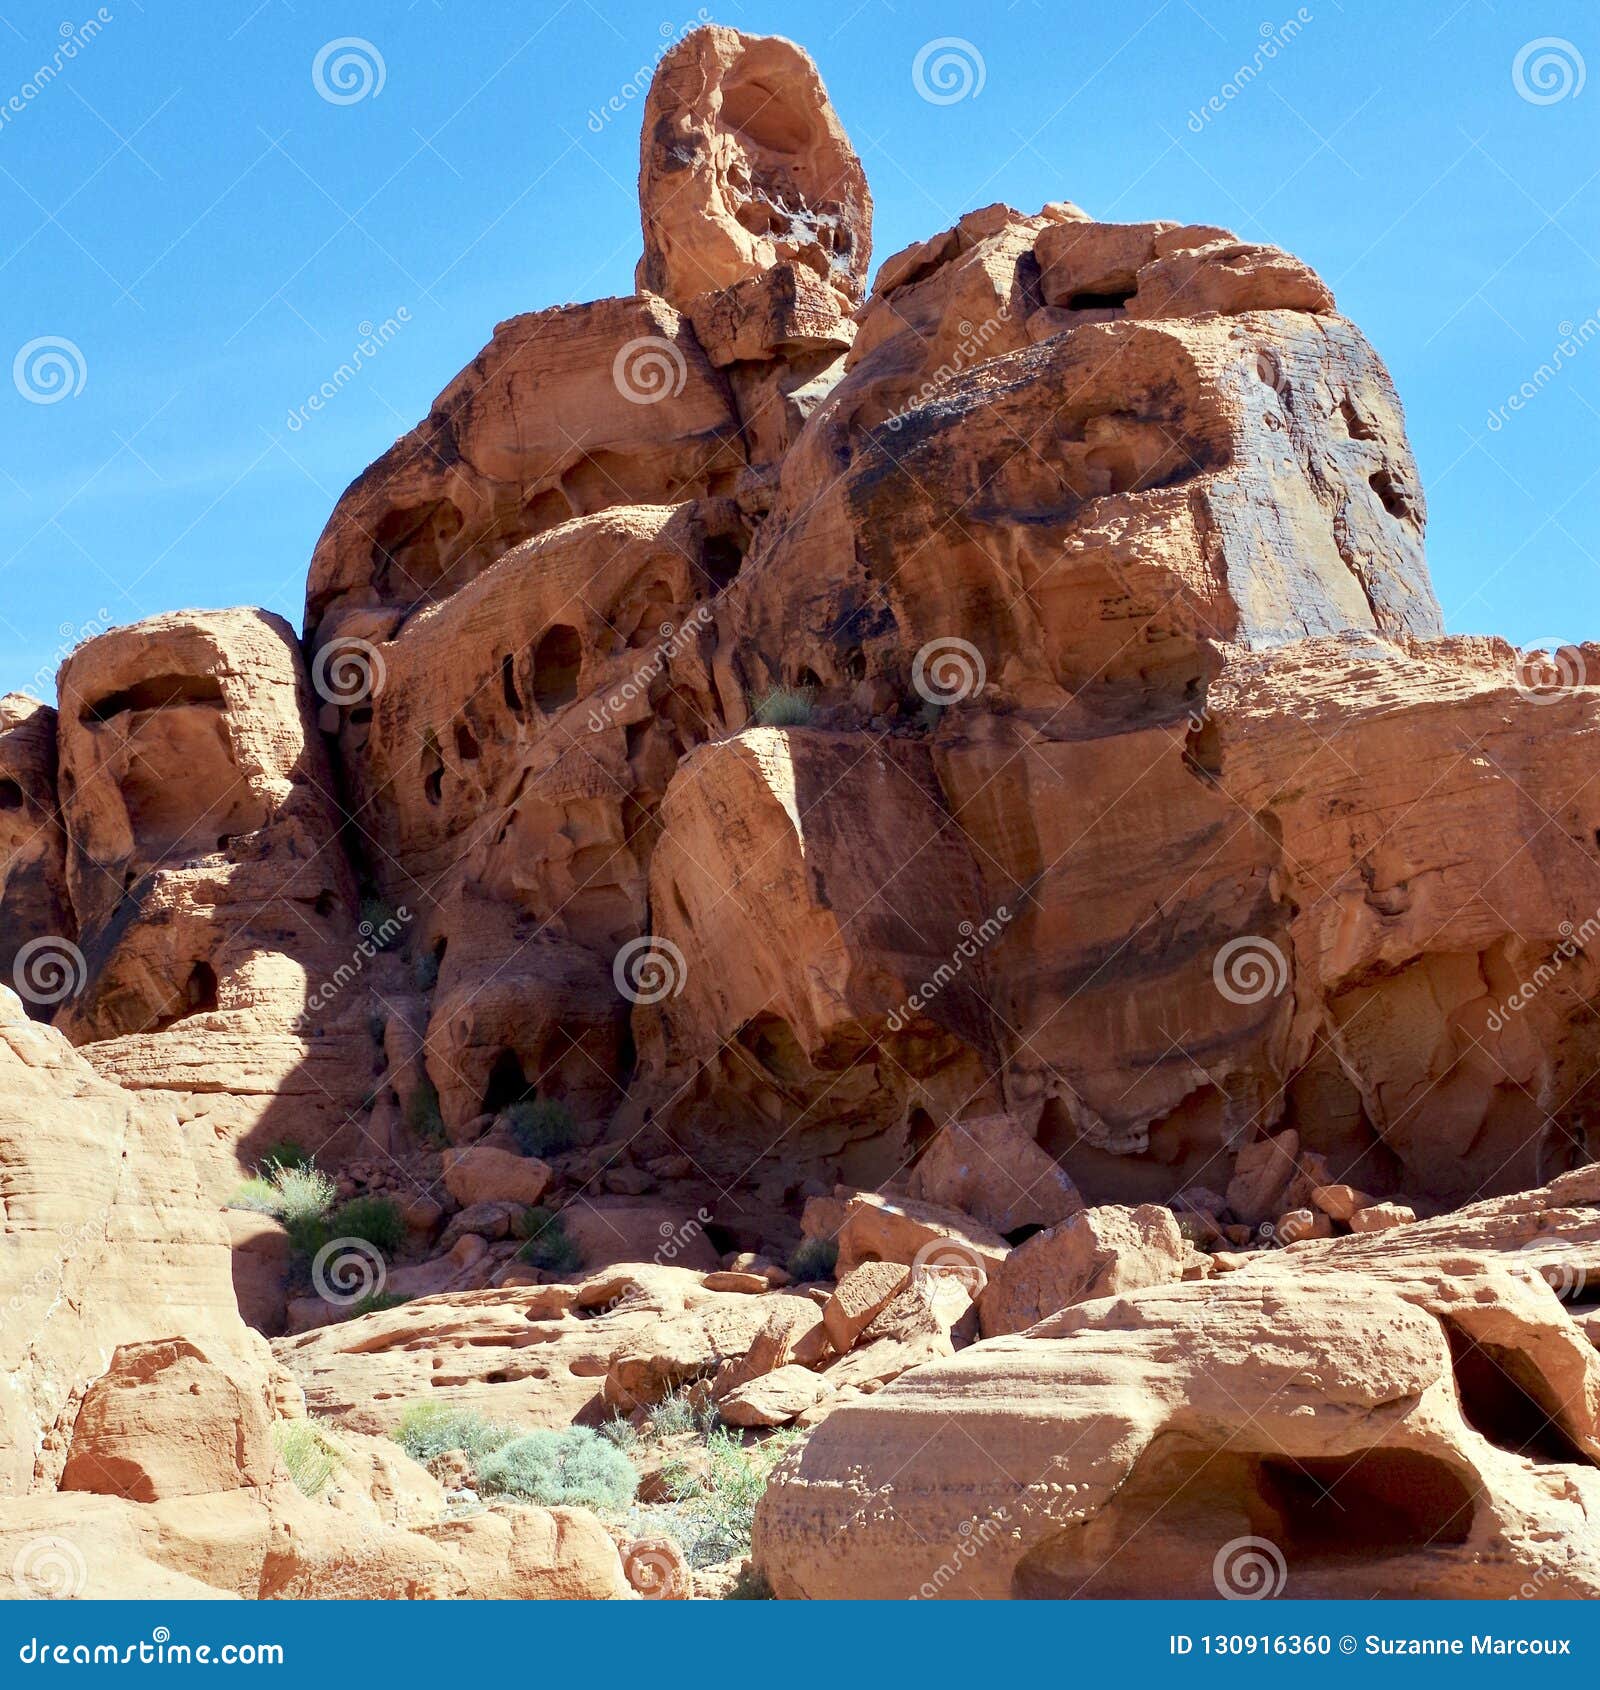 Albums 102+ Images flat top formations in us deserts Excellent